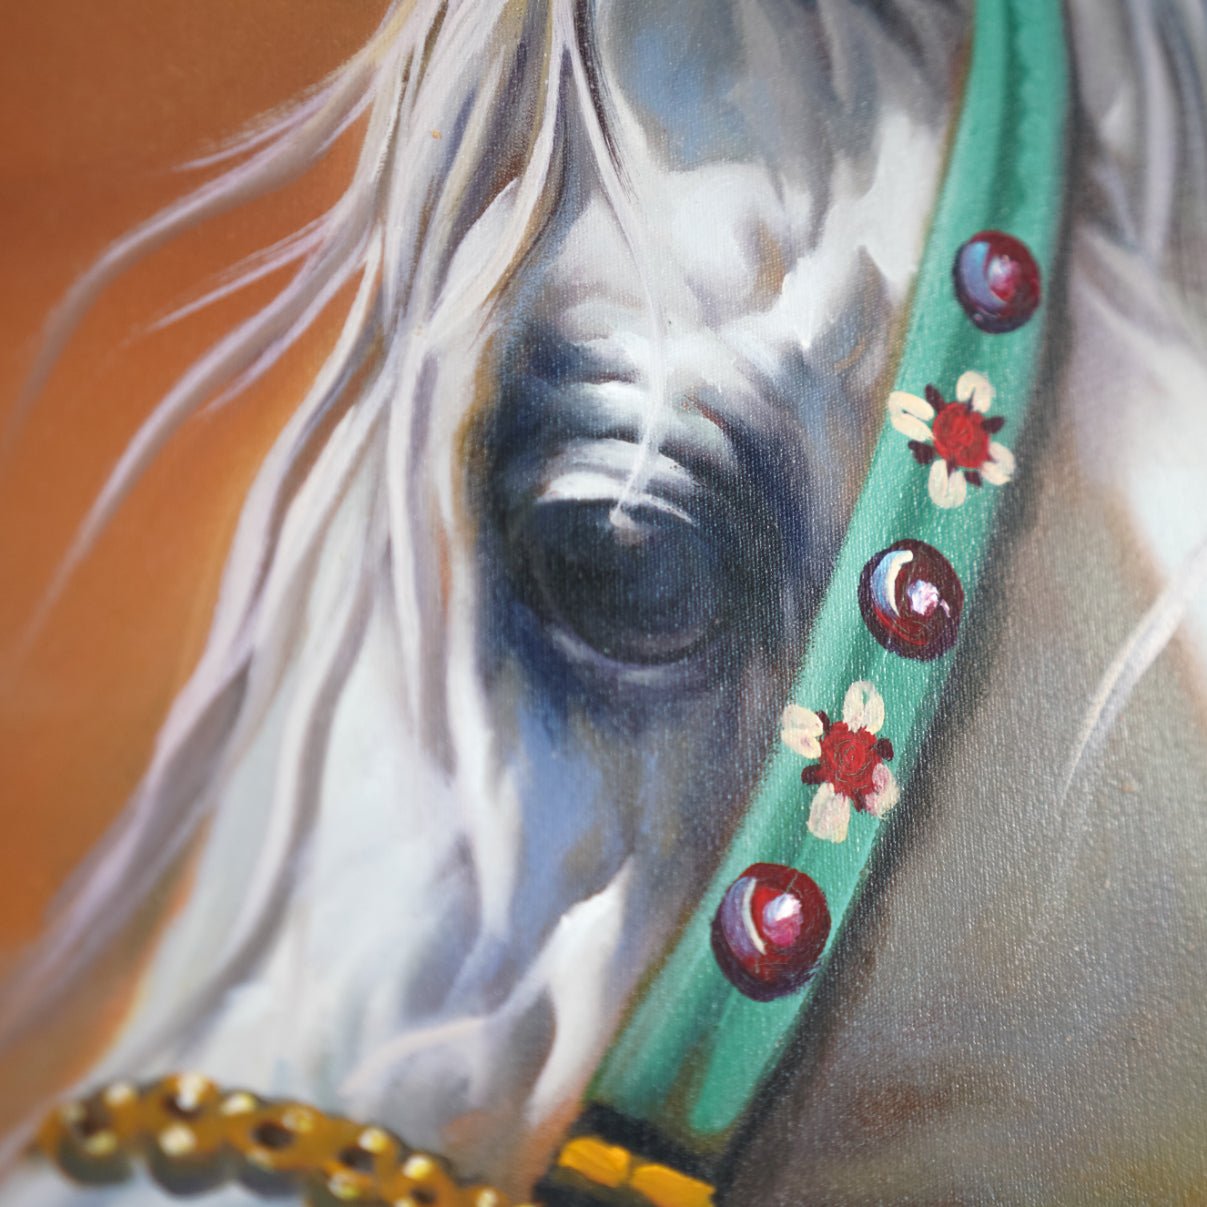 Salah Hussaini Oil Painting of Horse on Canvas - Sirdab - Sirdab